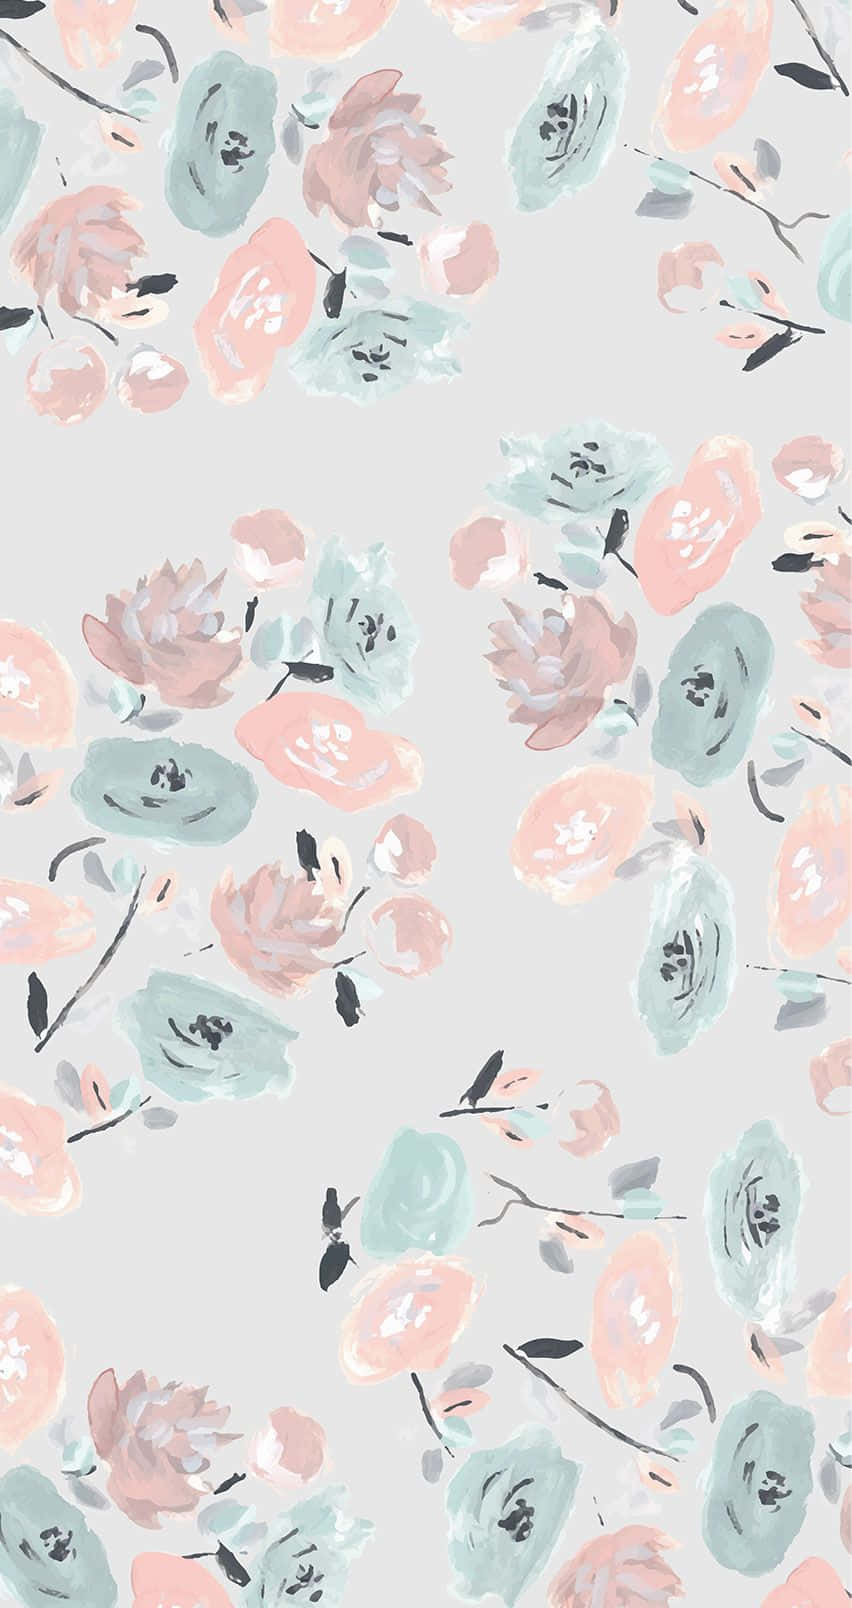 A beautiful pastel colored, cloudy flowery pattern. Wallpaper